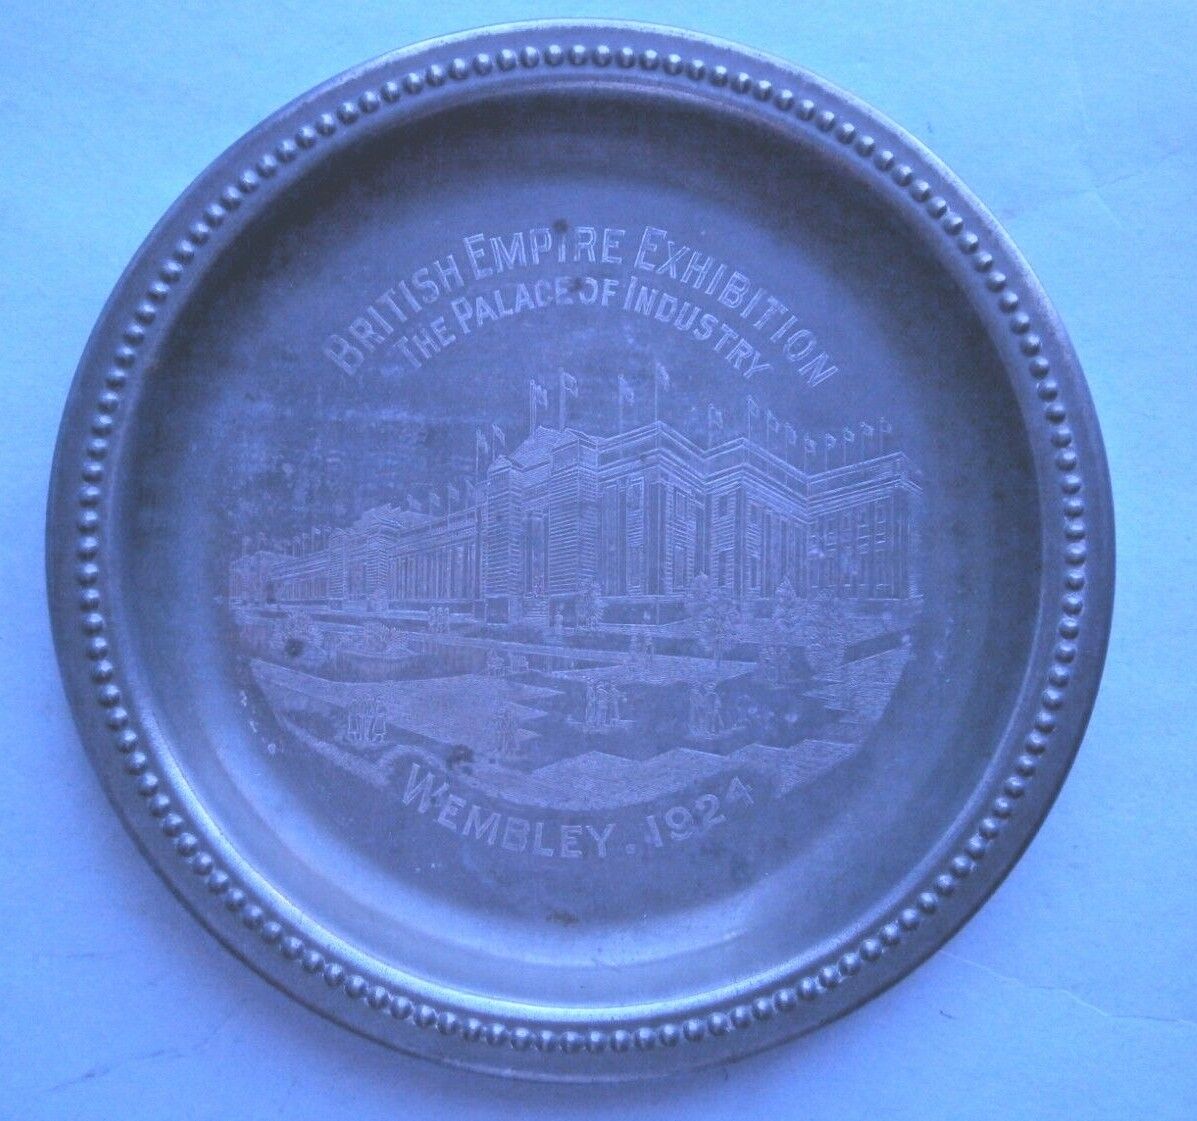 WEMBLEY 1924, BRITISH EMPIRE EXHIBITION - THE PALACE OF INDUSTRY Souvenir Plate,